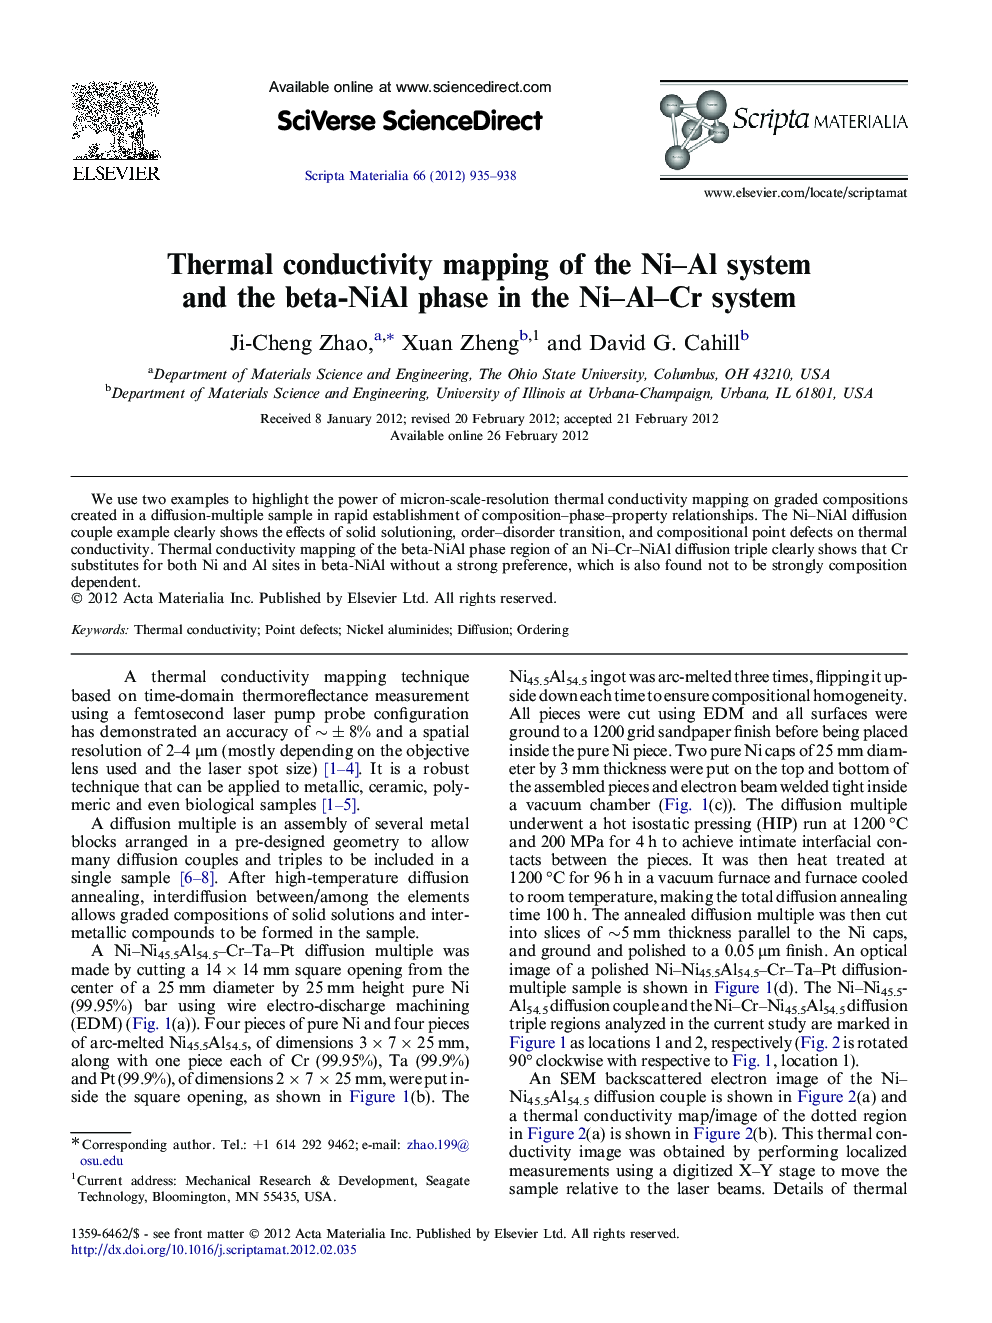 Thermal conductivity mapping of the Ni–Al system and the beta-NiAl phase in the Ni–Al–Cr system